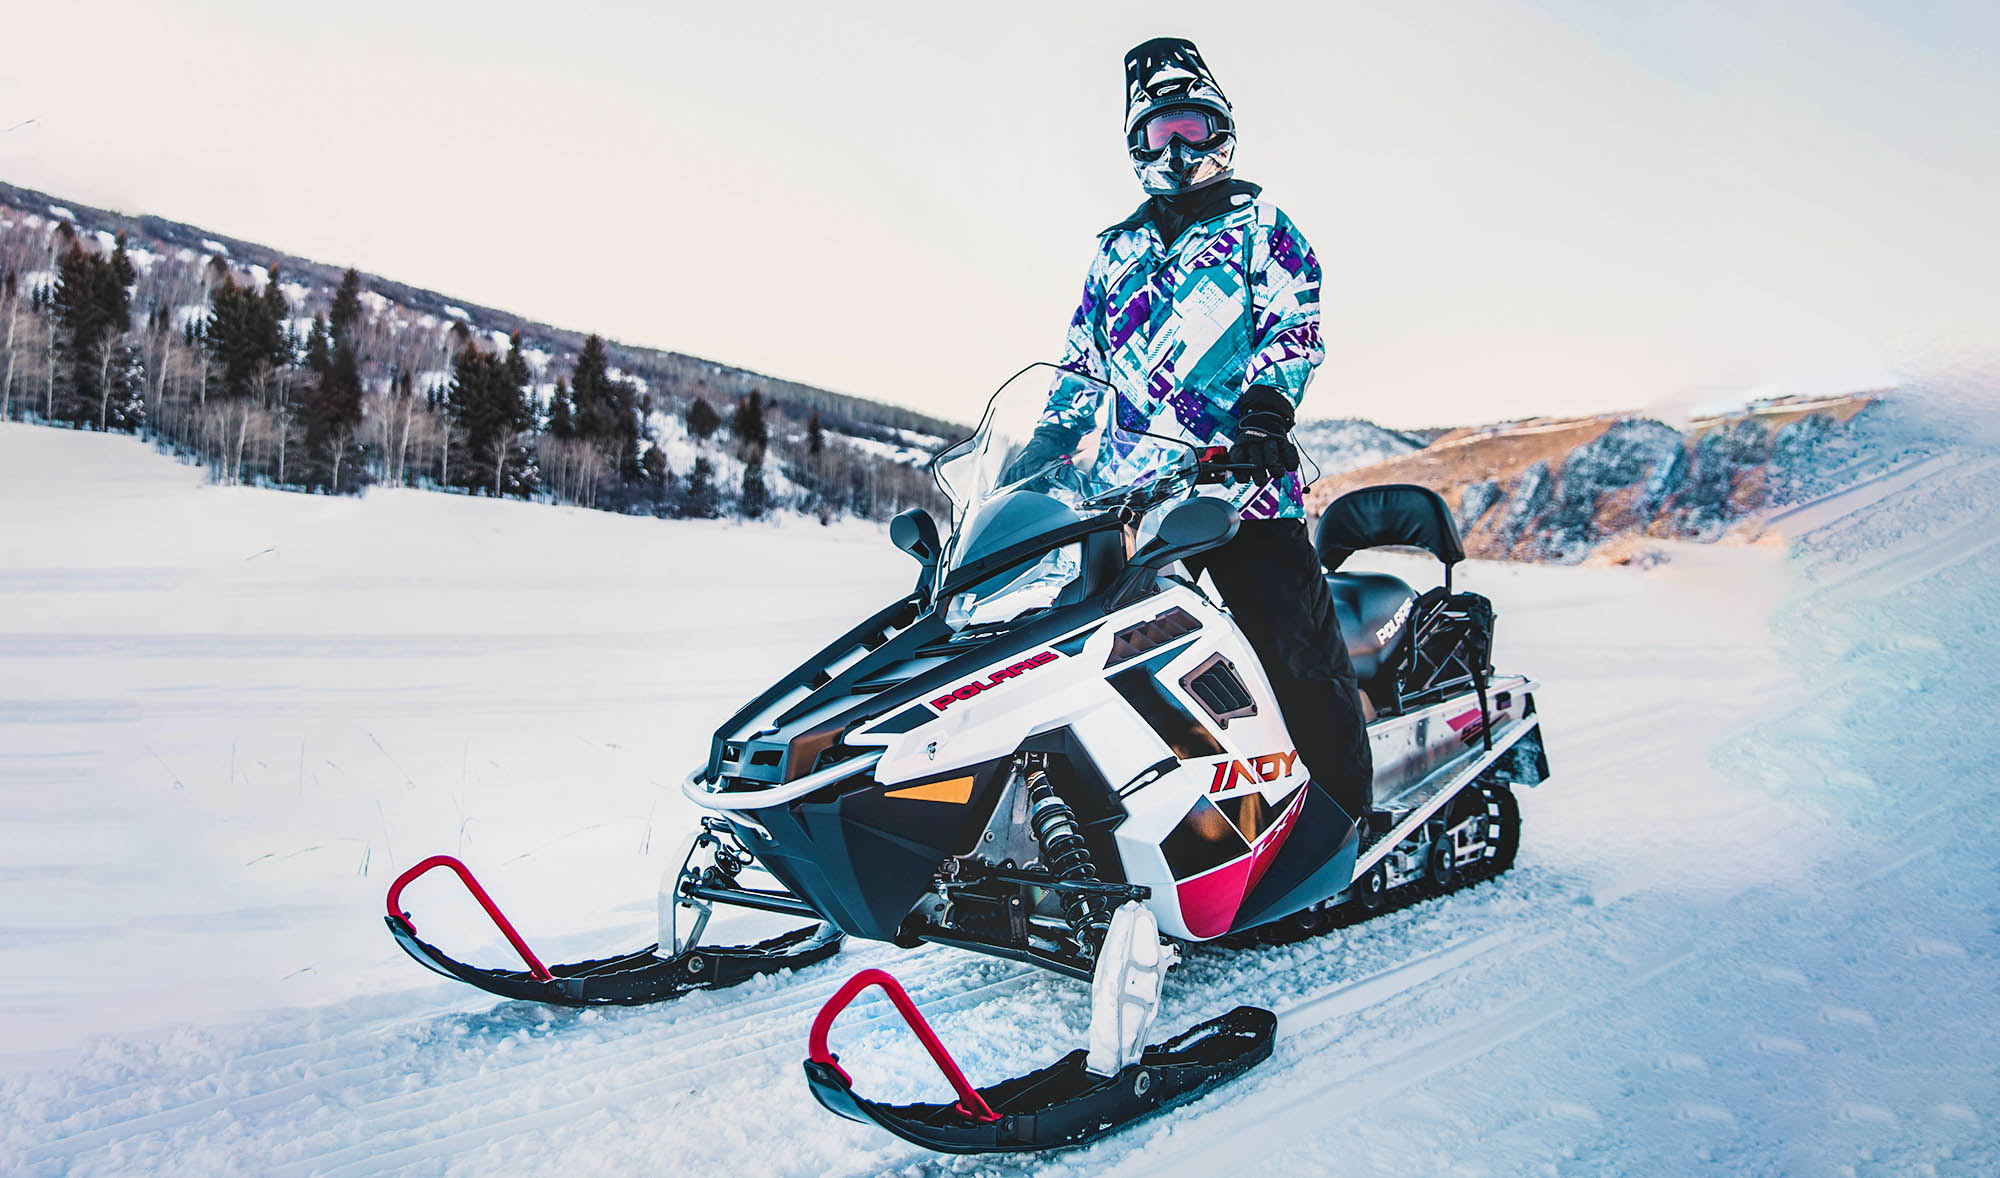 Snowmobiling on the terrain of Southwest Colorado